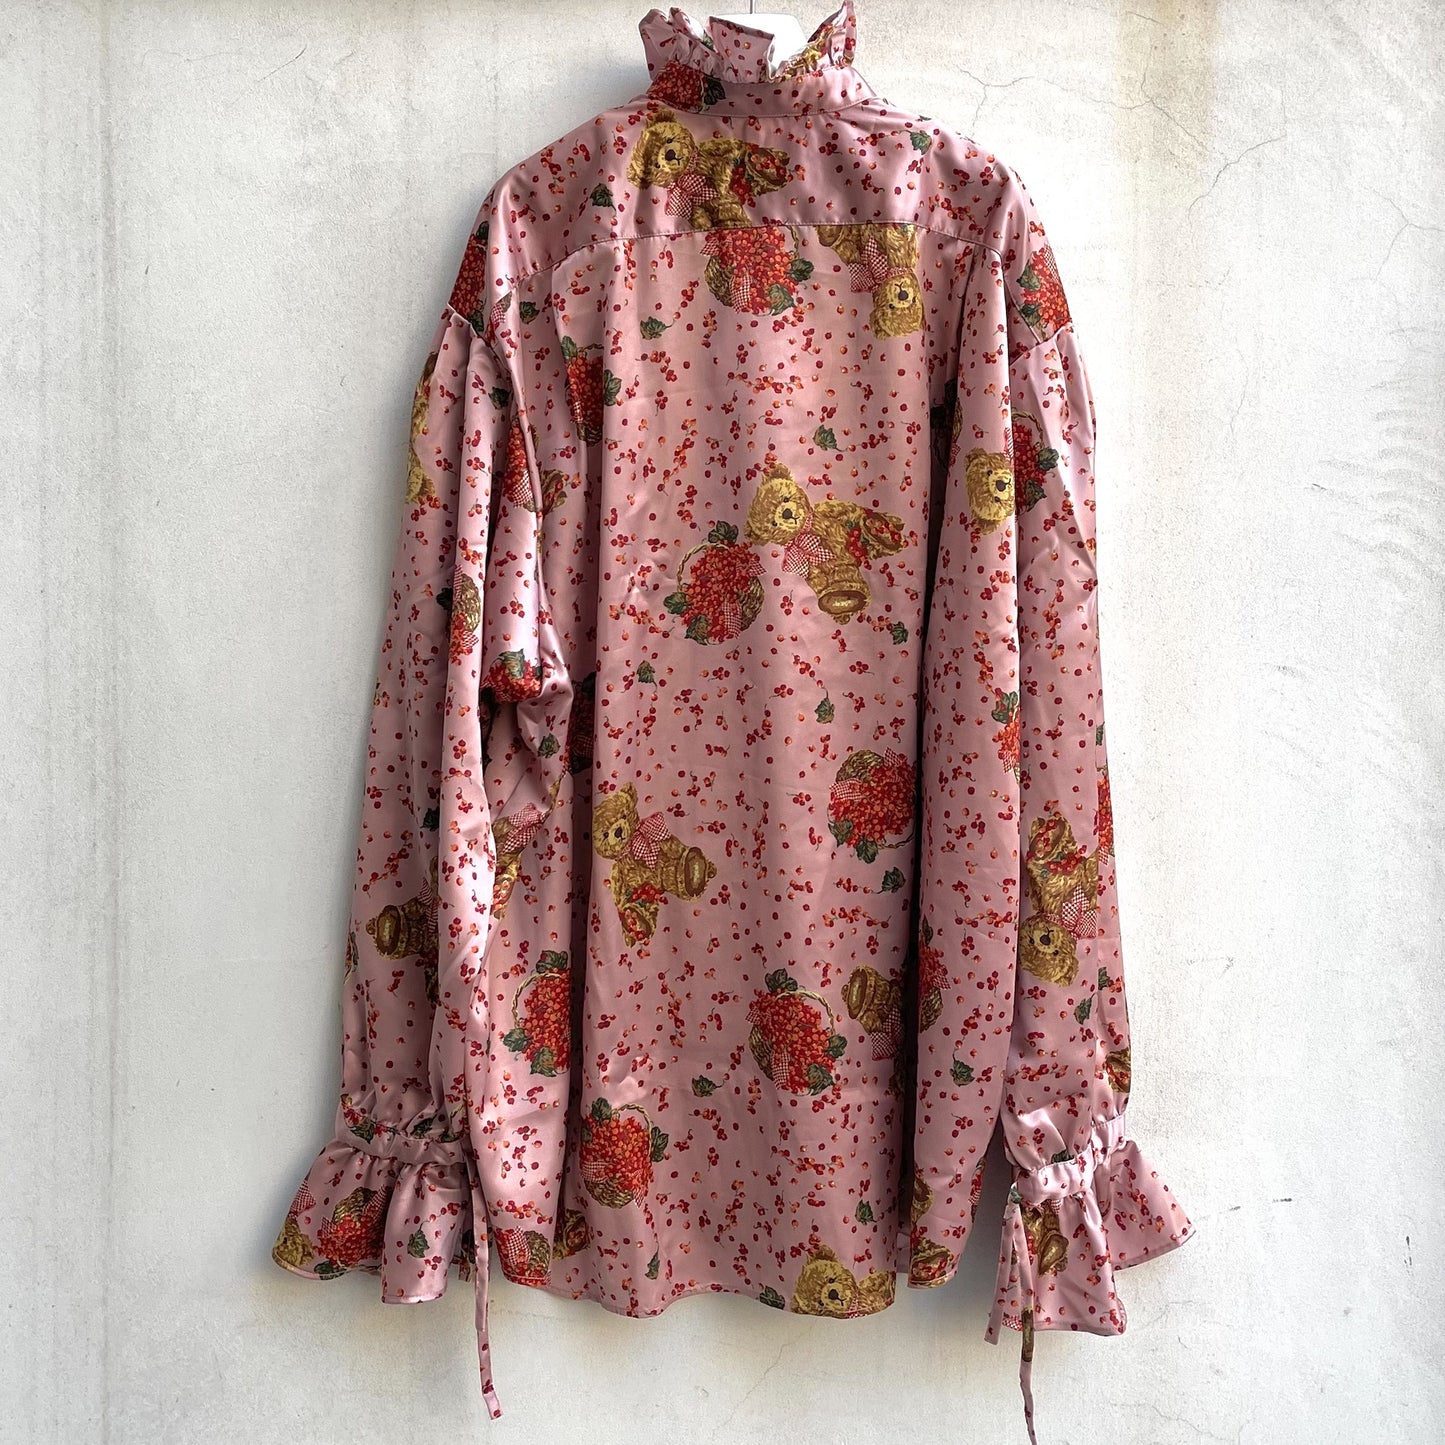 【MIKIOSAKABE×PINK HOUSE】Frill blouse / pink / ピンクフリルブラウス